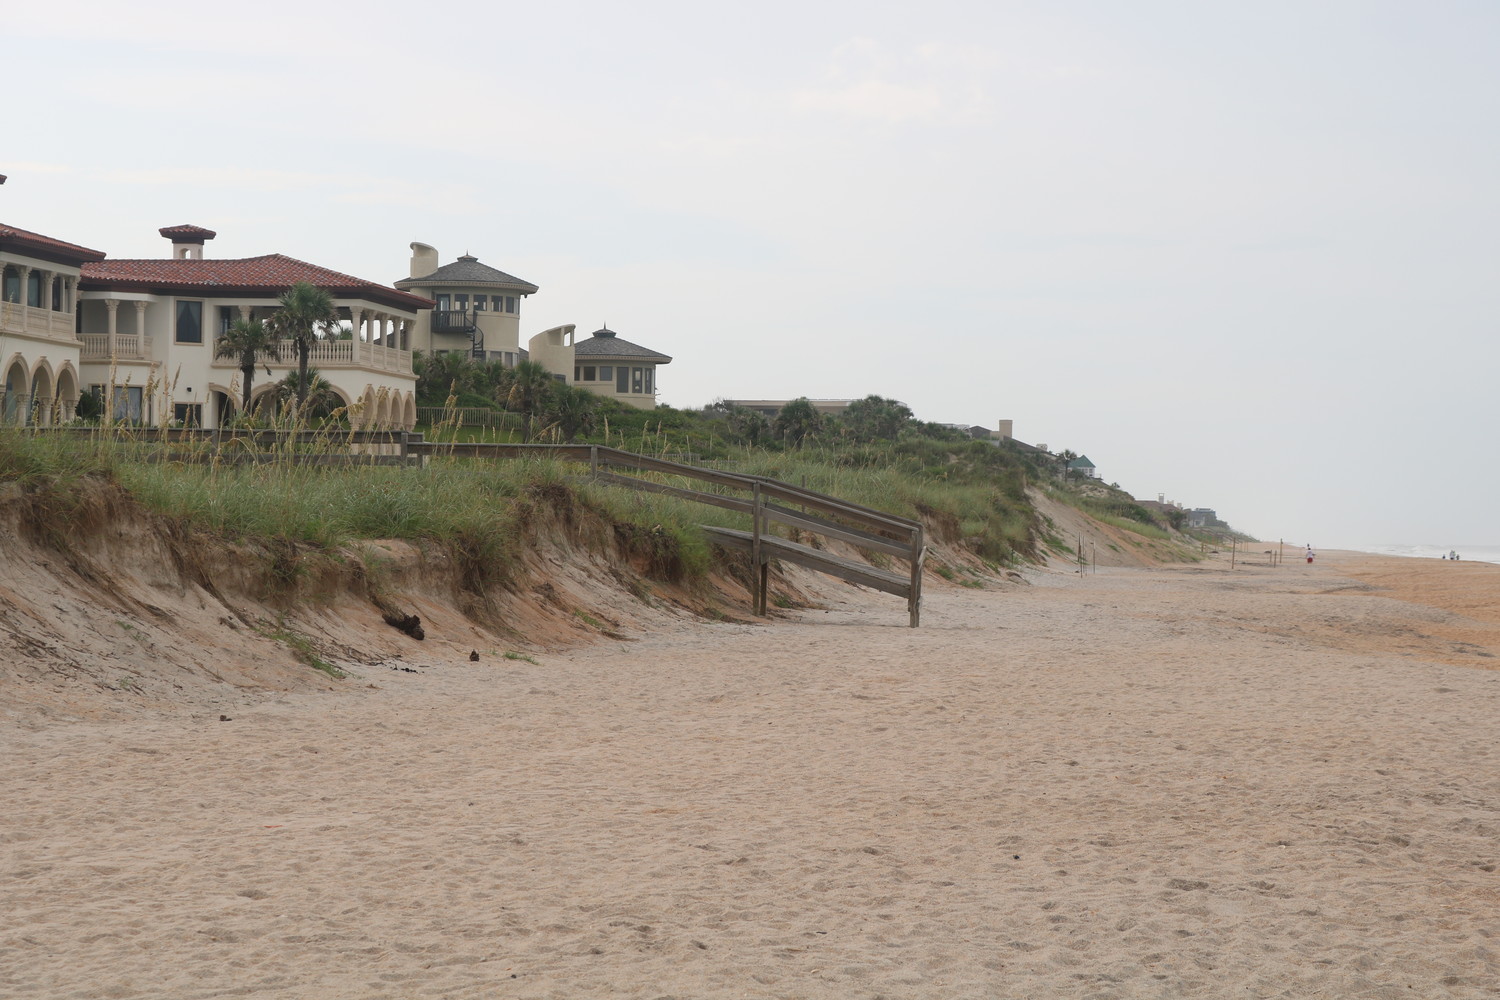 Coastal erosion in Ponte Vedra Beach has prompted the St. Johns County Commission to approve financial assistance for local beach restoration. With a 3-2 majority vote, the commissioners on Tuesday, July 17 approved up to $200,000 in immediate funding for such efforts.